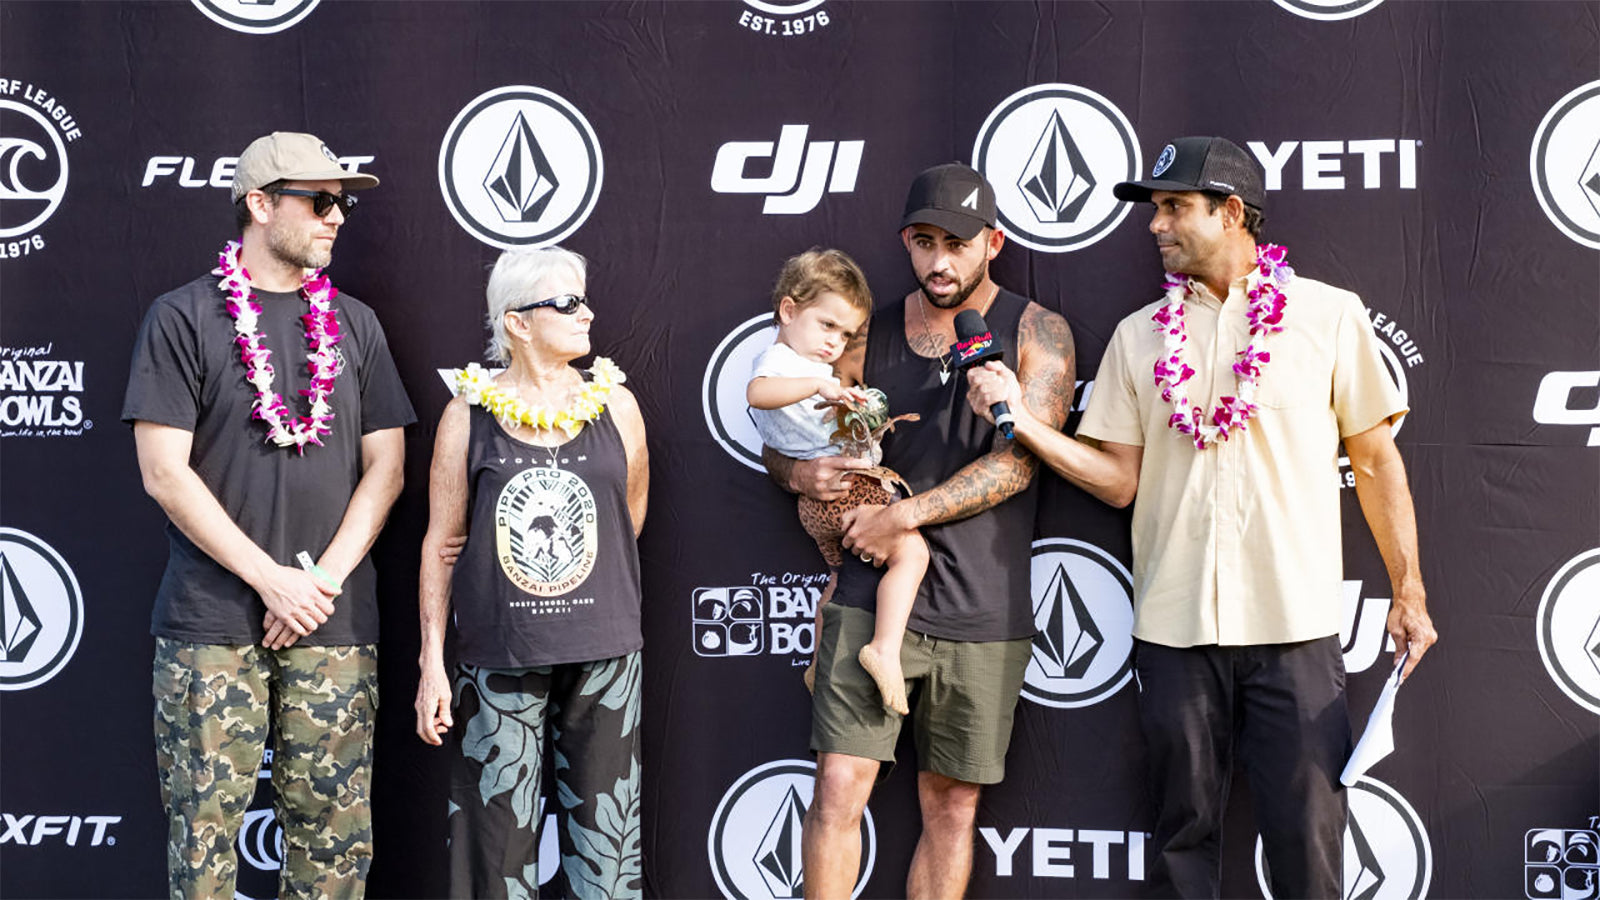 PIPELINE, UNITED STATES- FEBRUARY 01: Prize giving during day 4 the 2020 Volcom Pipe Pro at Pipeline, Haleiwa on February 01, 2020 in Hawaii, USA. (Photo by Keoki Saguibo/WSL via Getty Images)